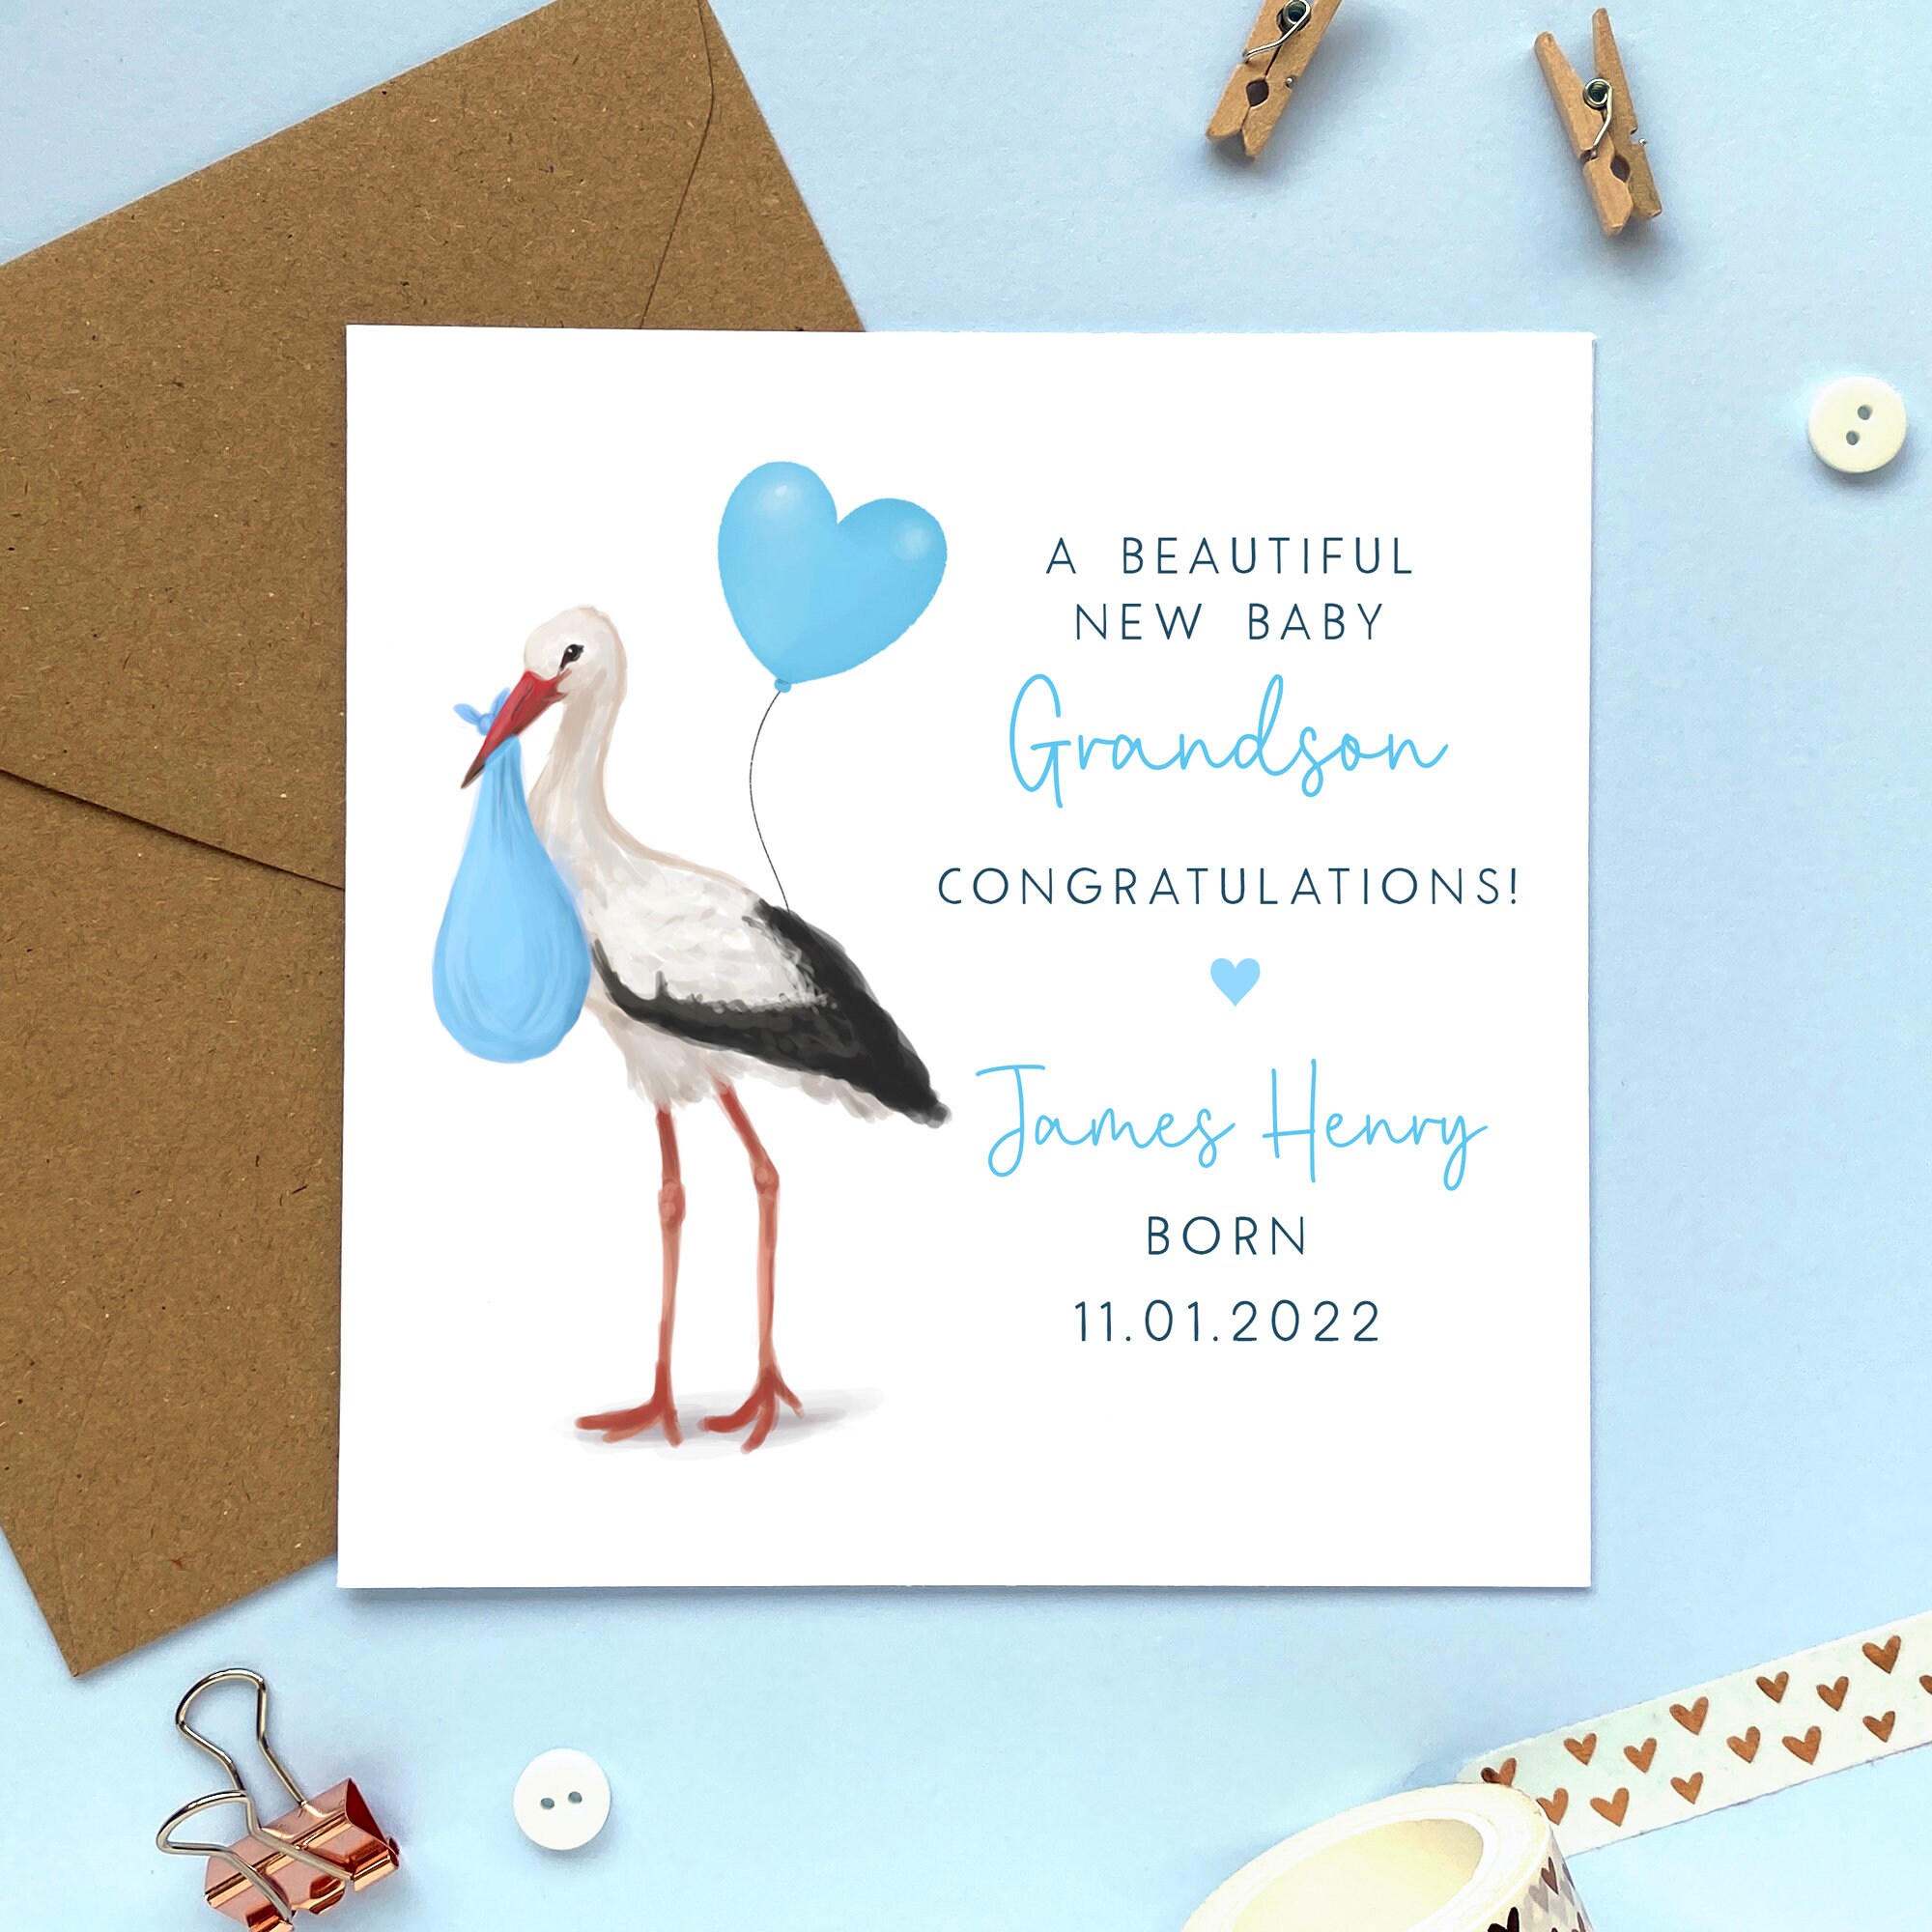 PERSONALISED NEW BABY GRANDSON CONGRATULATIONS CARD BOY SON GREAT GRANDSON NAME 